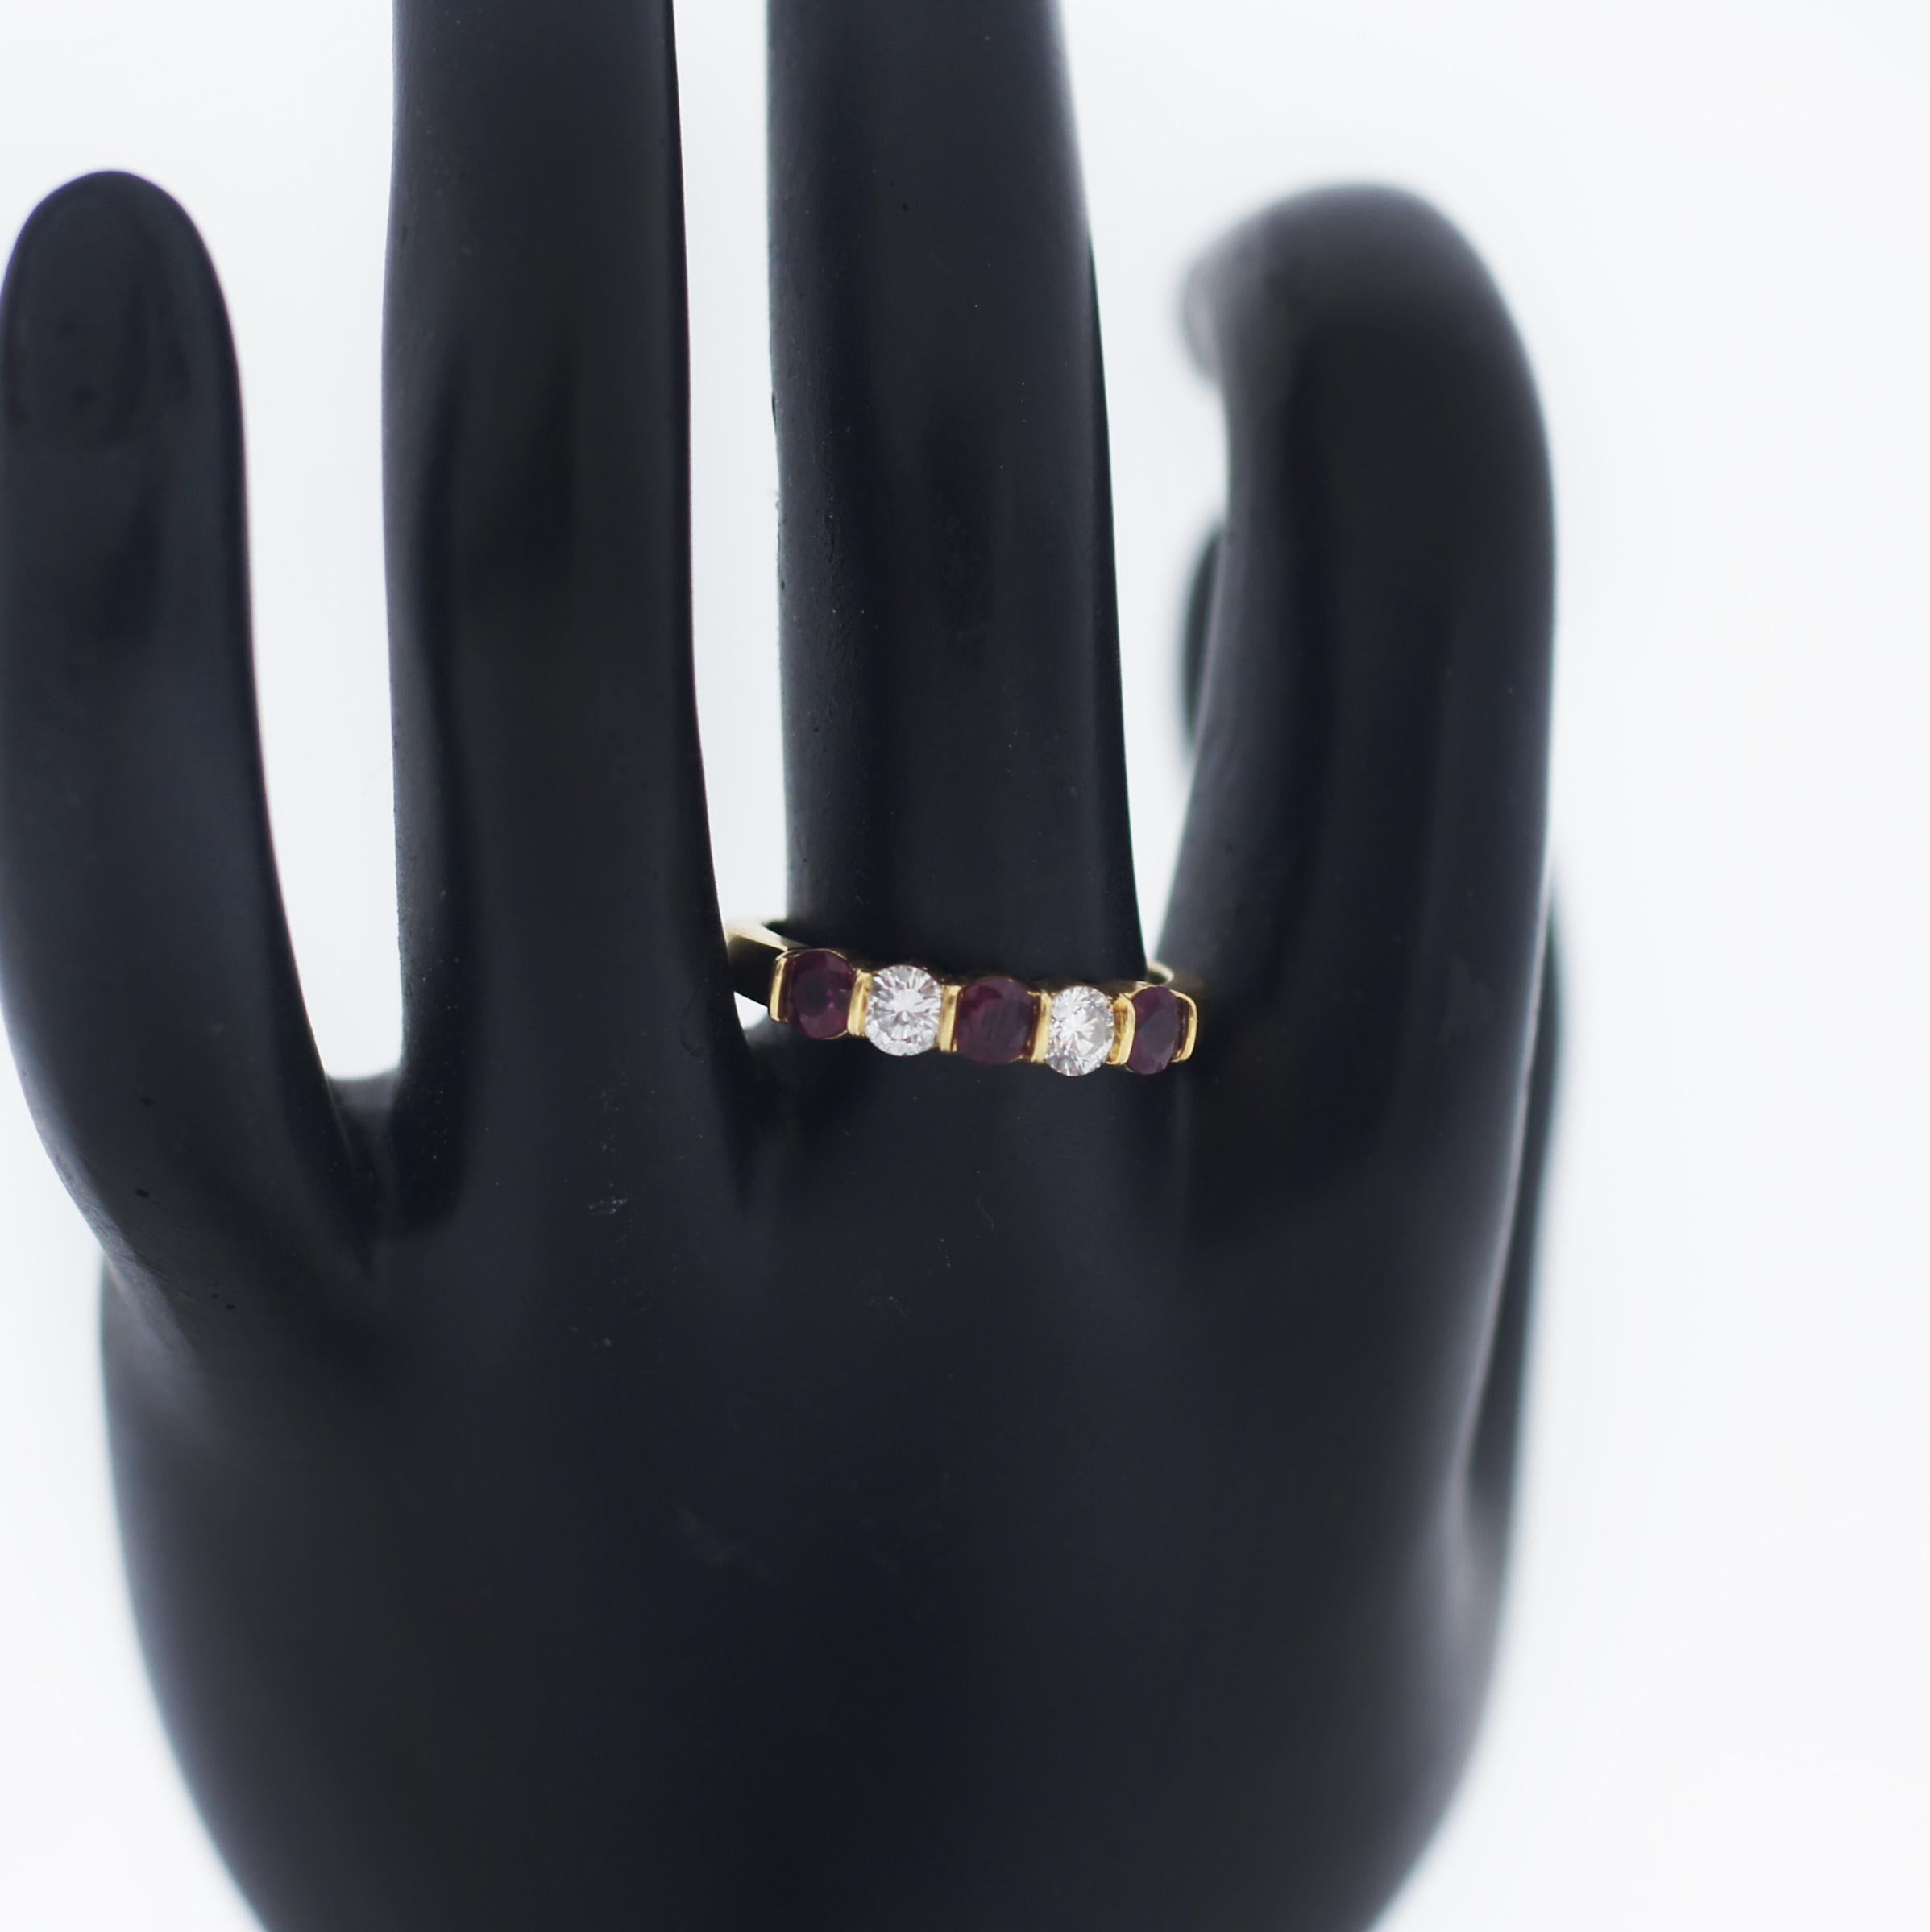 Beautiful and simple 18k yellow gold diamond and ruby ring by Tiffany and Co. The ring is set with three round rubies totalling approximately 0.18ct in a four claw setting which each disperse a bright pinky/red hue throughout. Alternating between